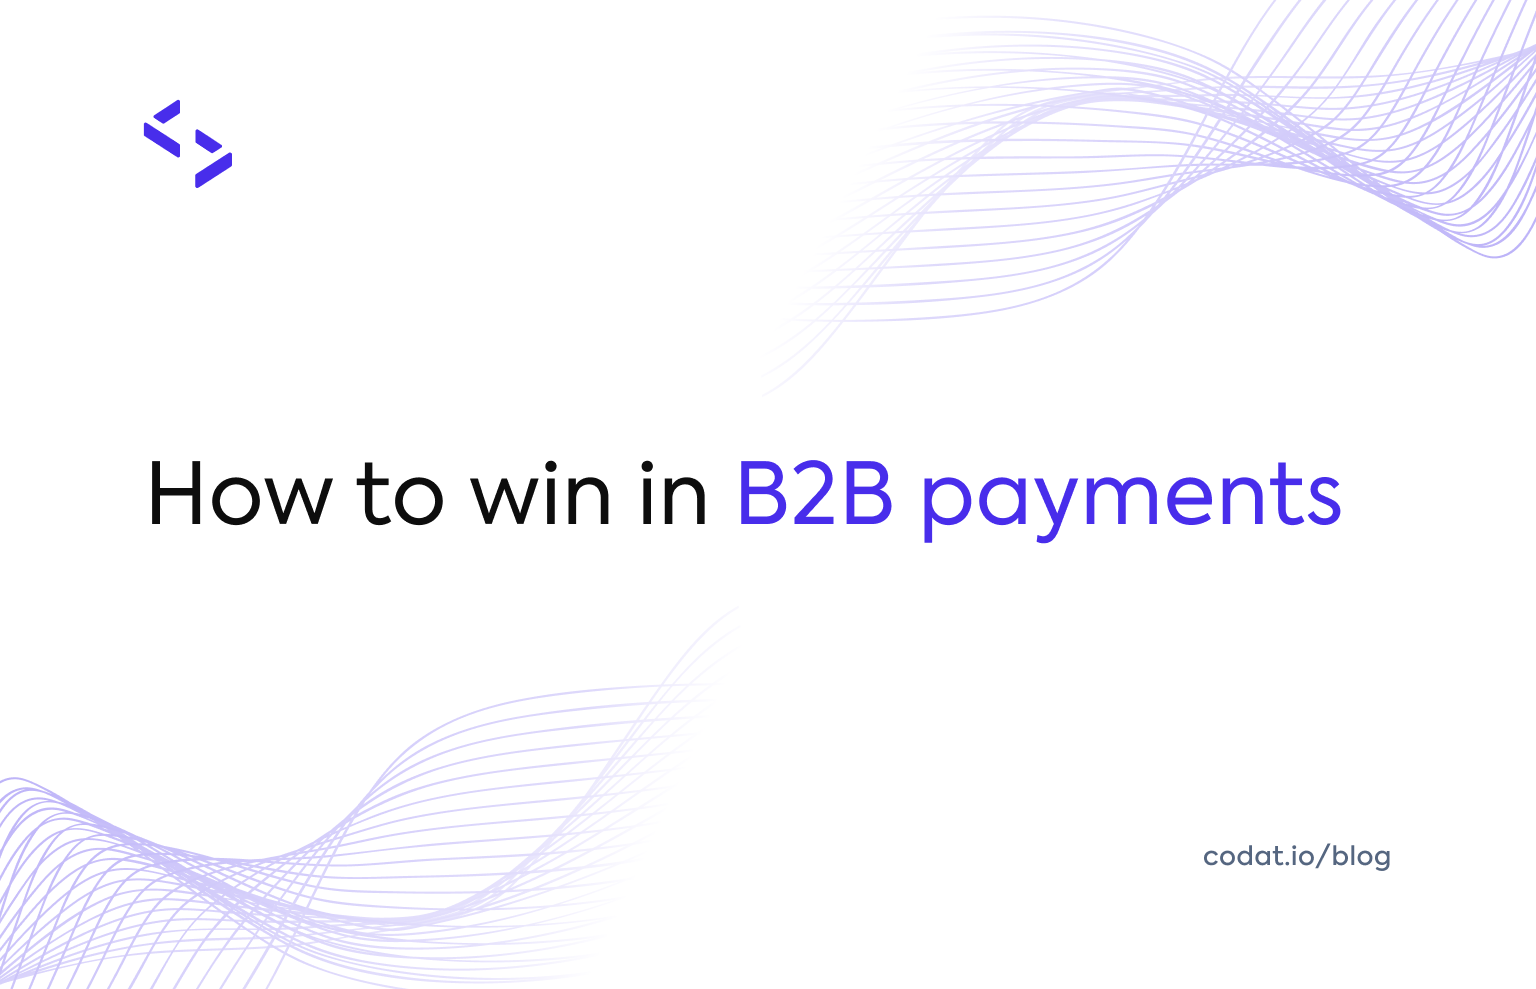 How to win in B2B payments